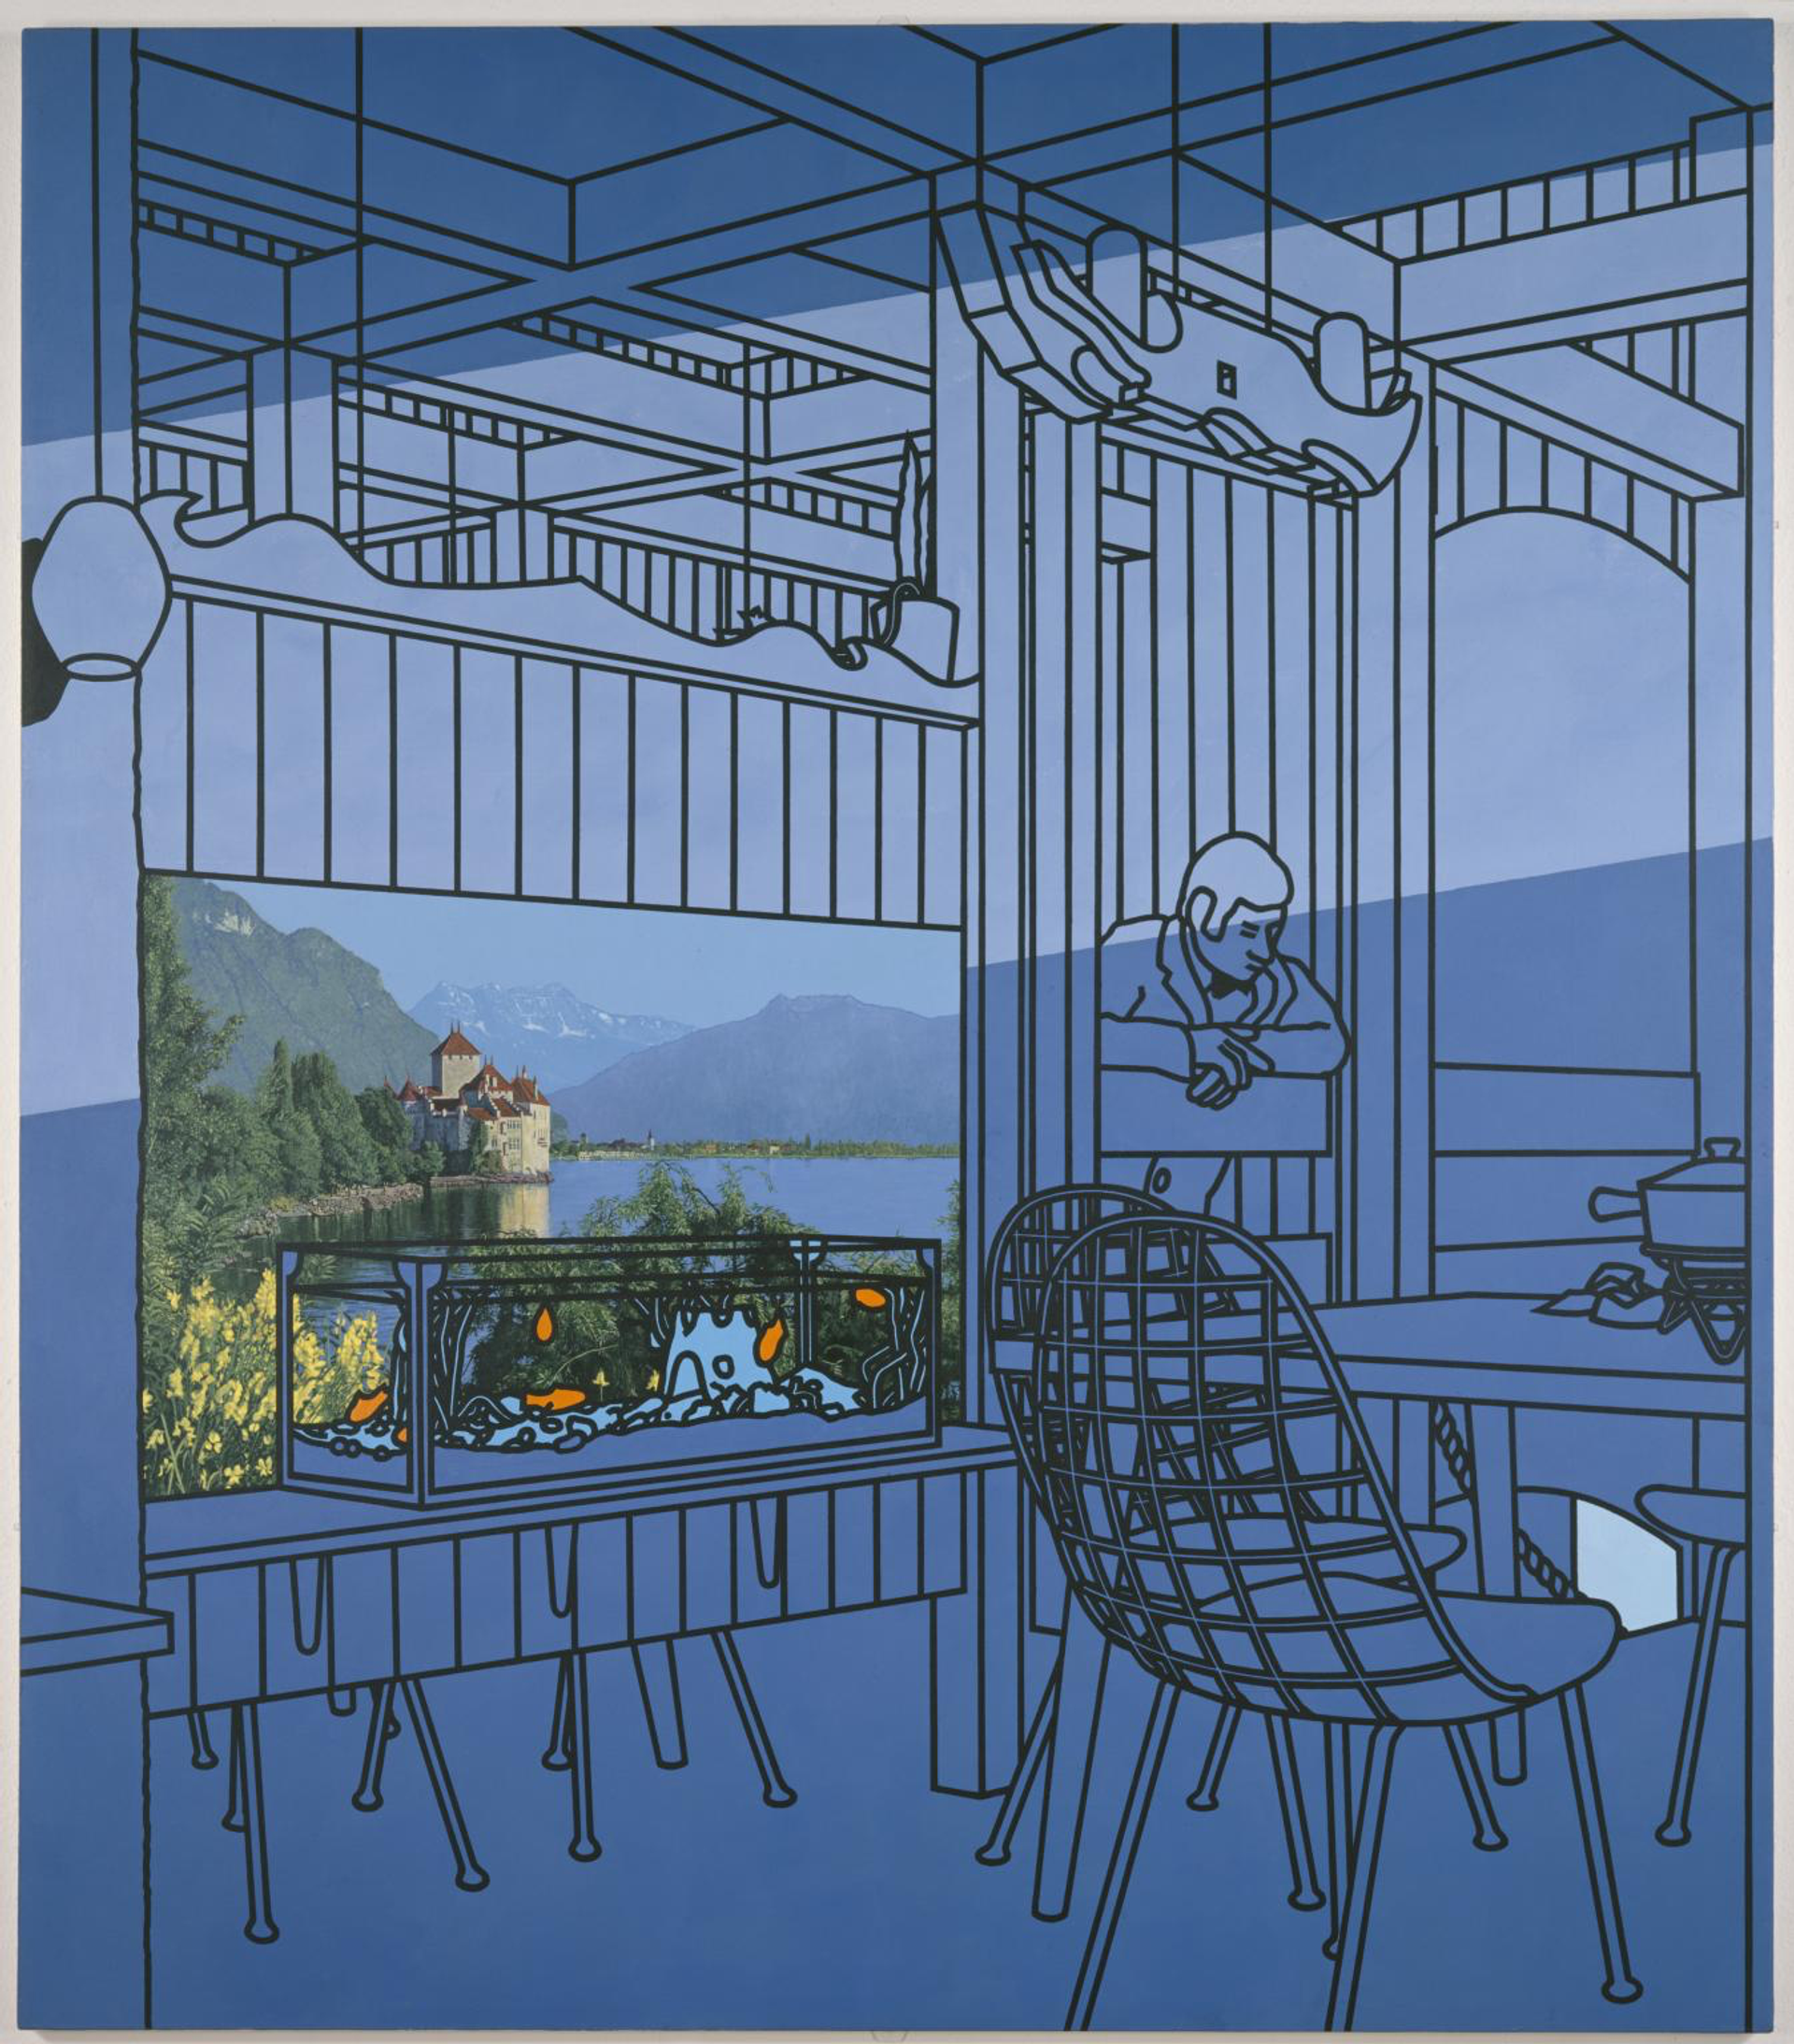 Image © Tate / After Lunch © The Estate of Patrick Caulfield 1975